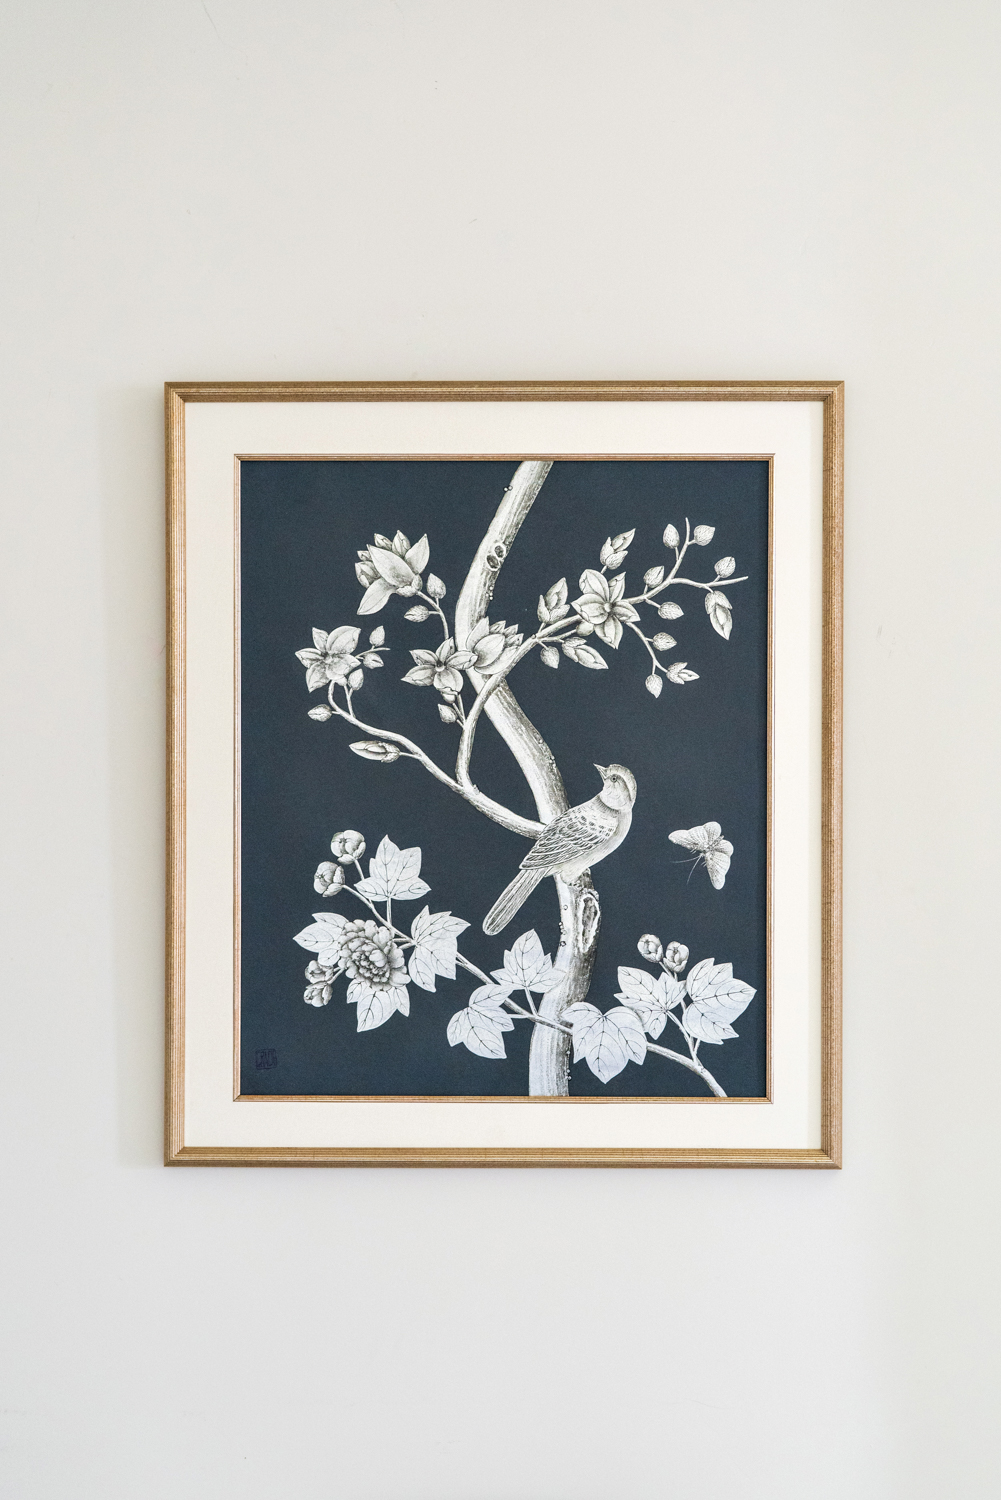 Framed white scenic floral with a bird resting on a branch hand-painted against deep blue